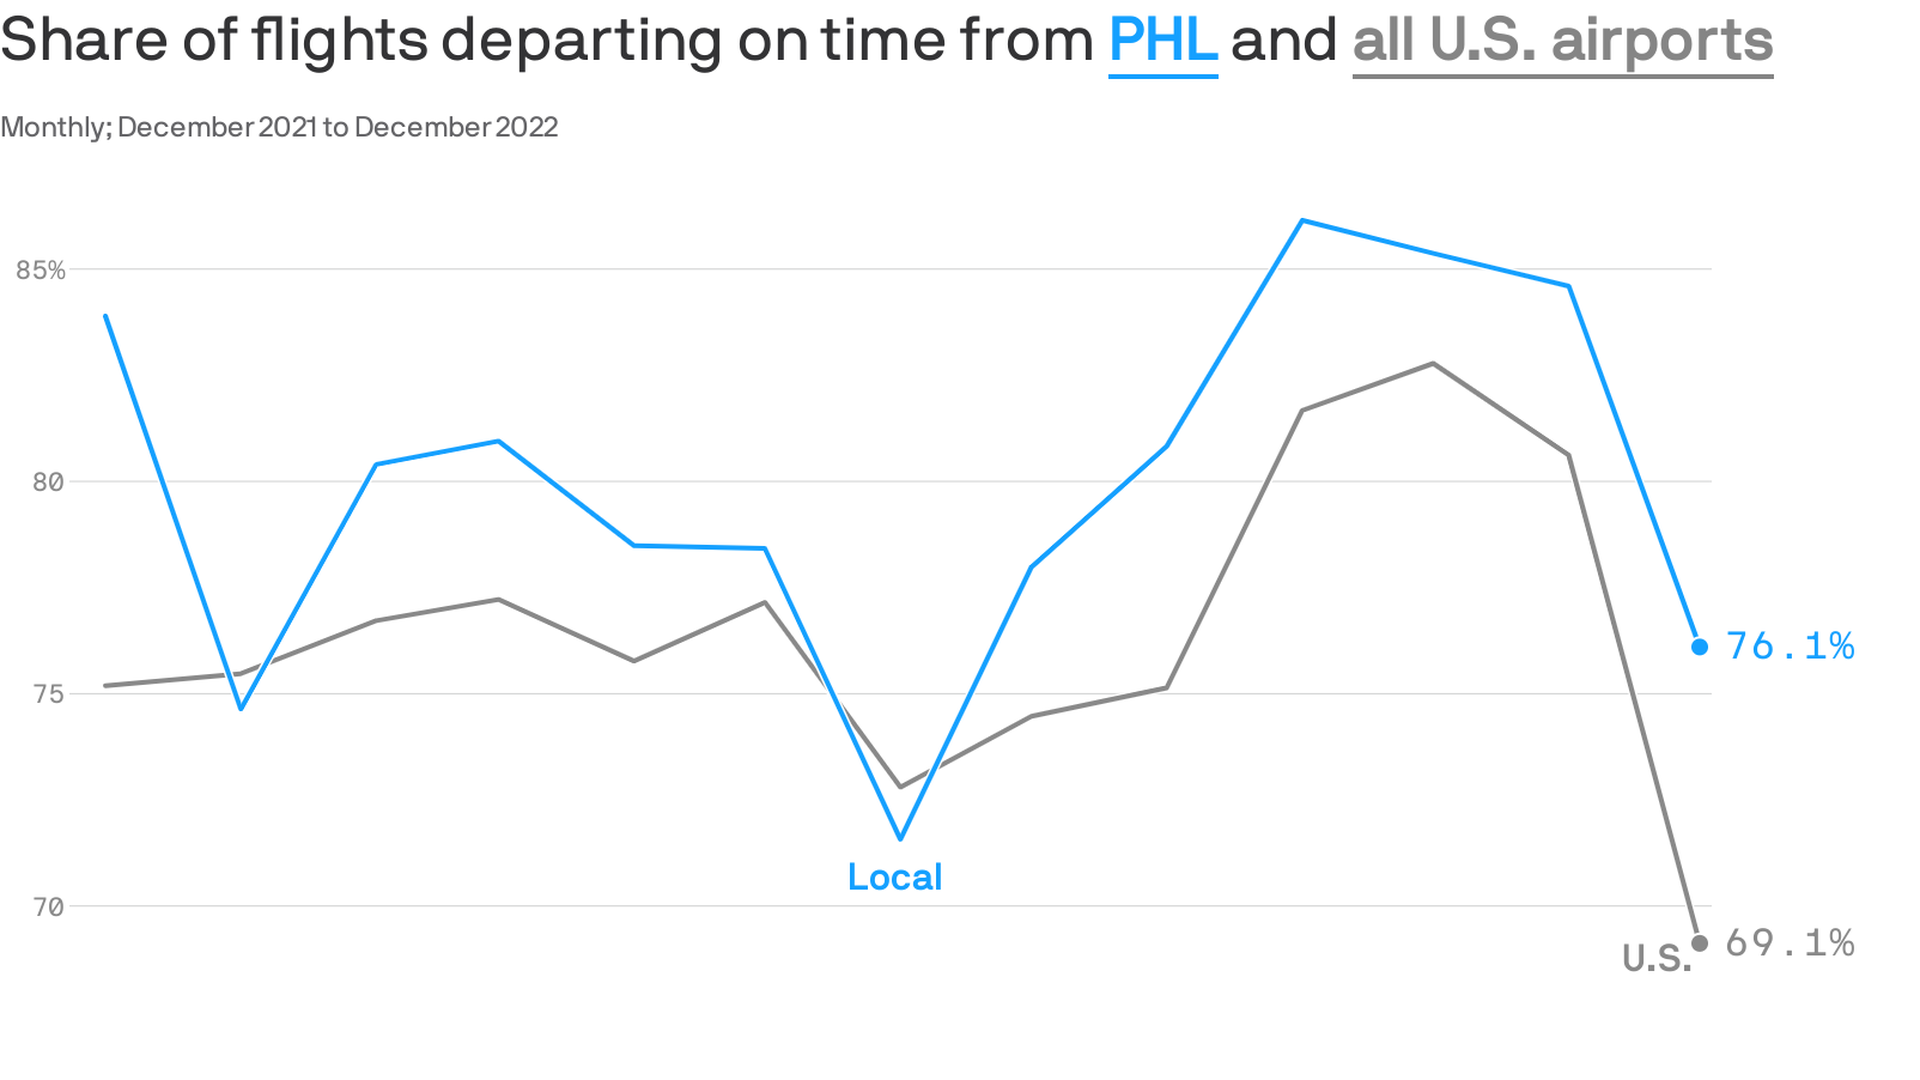 Chart showing that 76.1% of Philly airport flights departed on time in December 2022